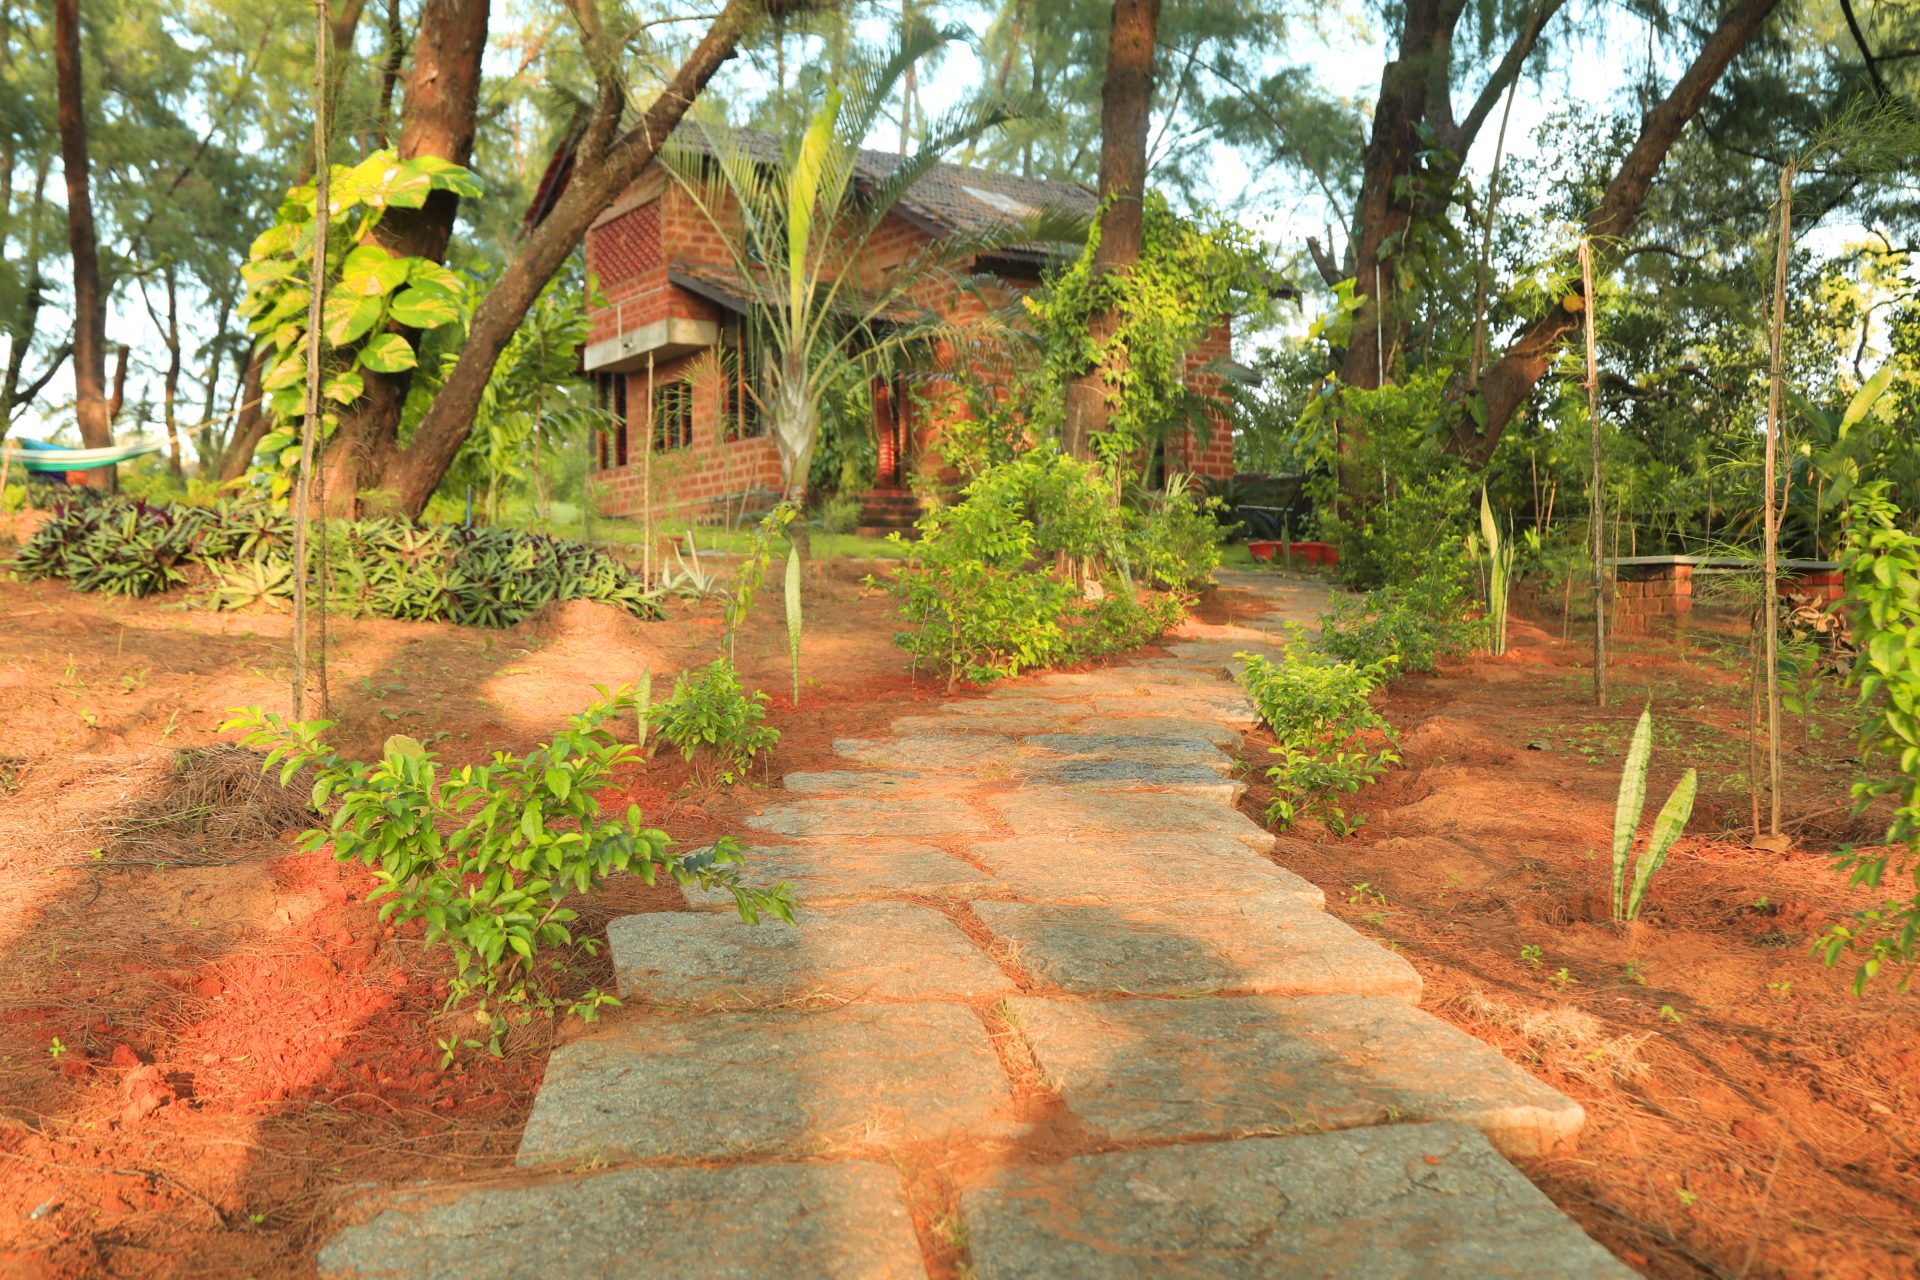 The pathway leading to the villa. Picture taken in October 2021.